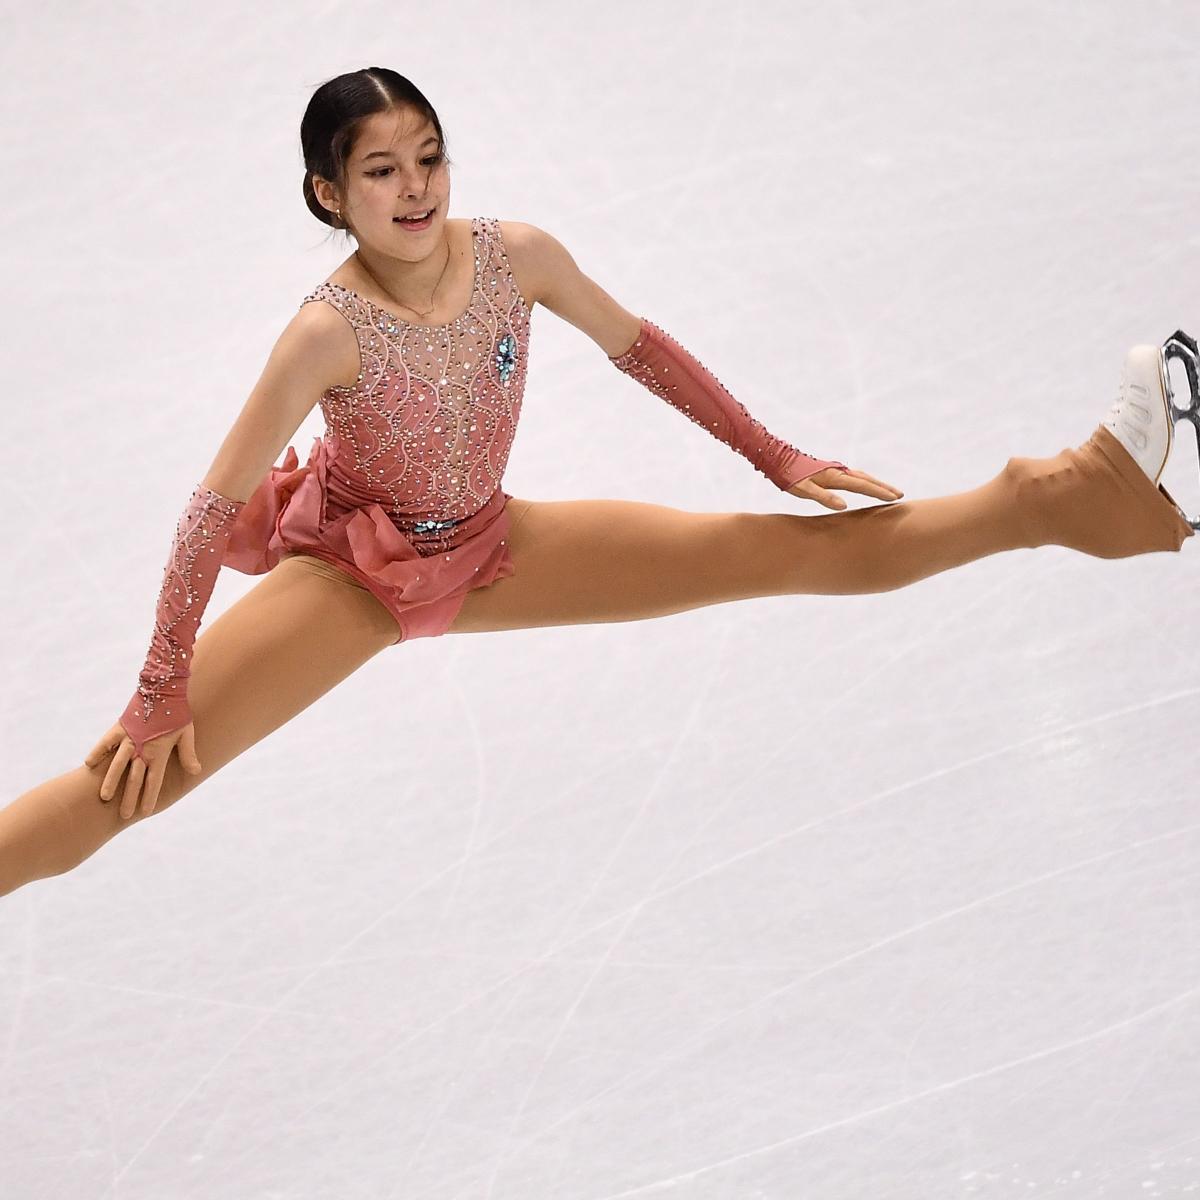 US Figure Skating Championships 2020: Thursday TV Schedule, Top